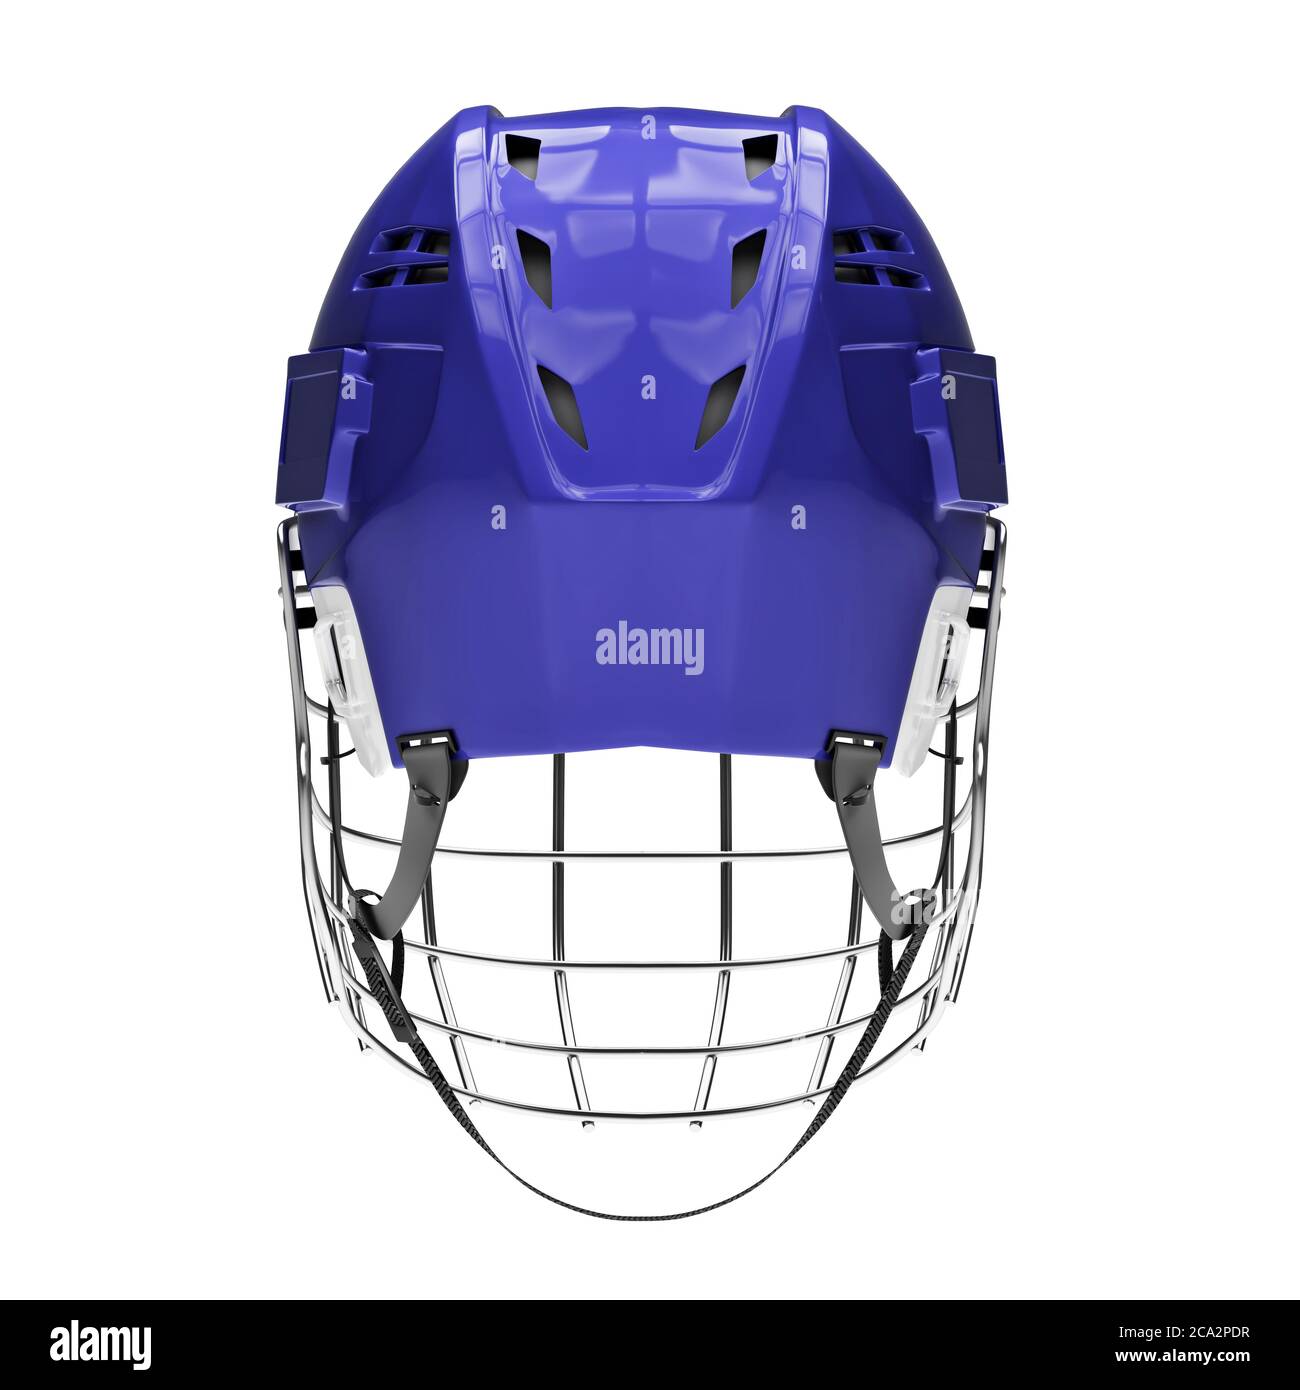 Classic Ice Hockey Helmet with Metal Facemask Stock Photo